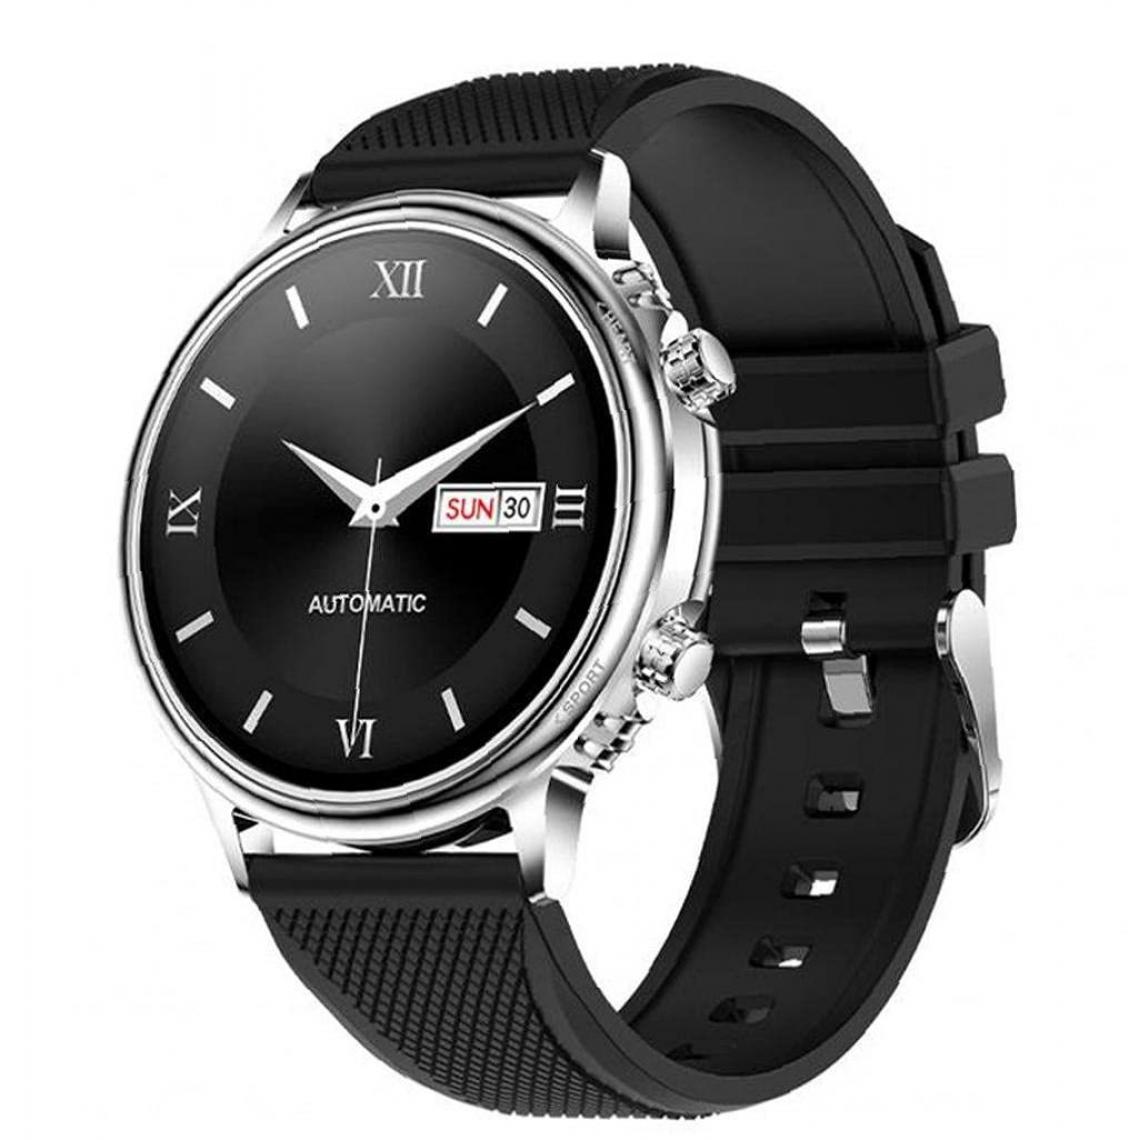 Chronotech Montres - Smartwatch 1.32inch Full Touch Silicone With IP67 Waterproof, Exercise Record, Heart Rate & Female Menstrual Cycle.(black) - Montre connectée